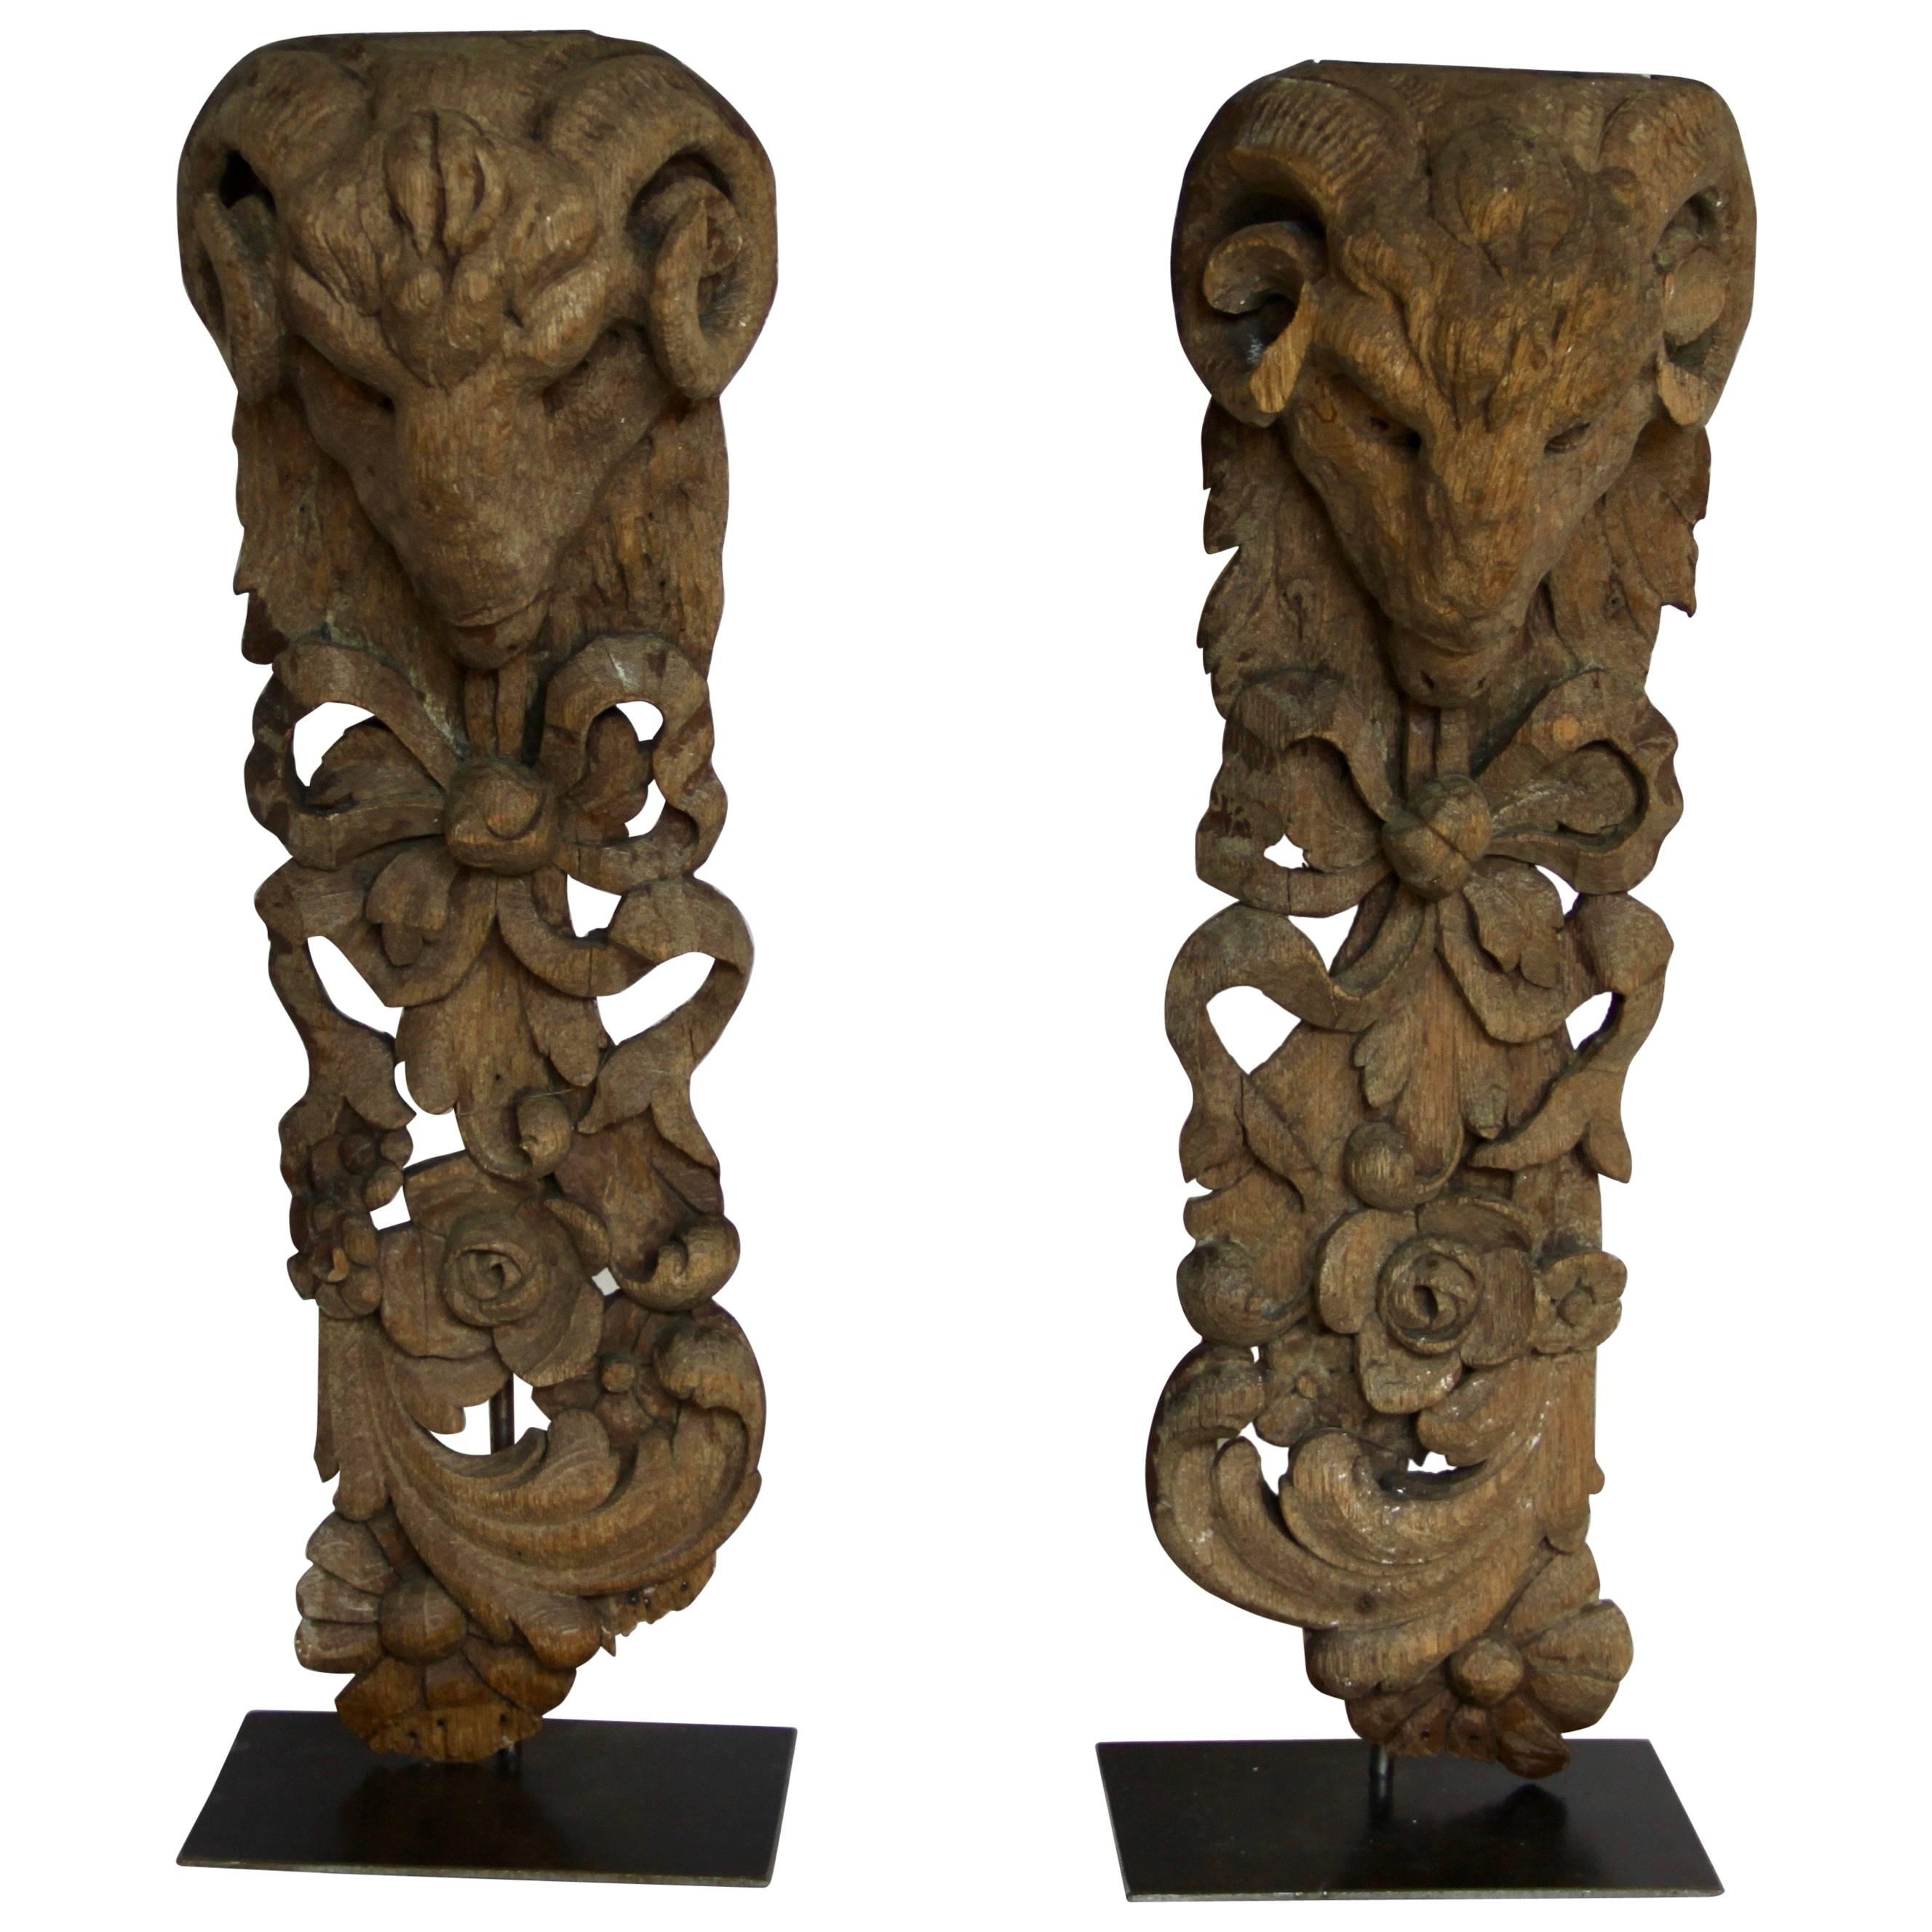 Pair of Antique Hand Carved Architectural Elements with Ram's Head